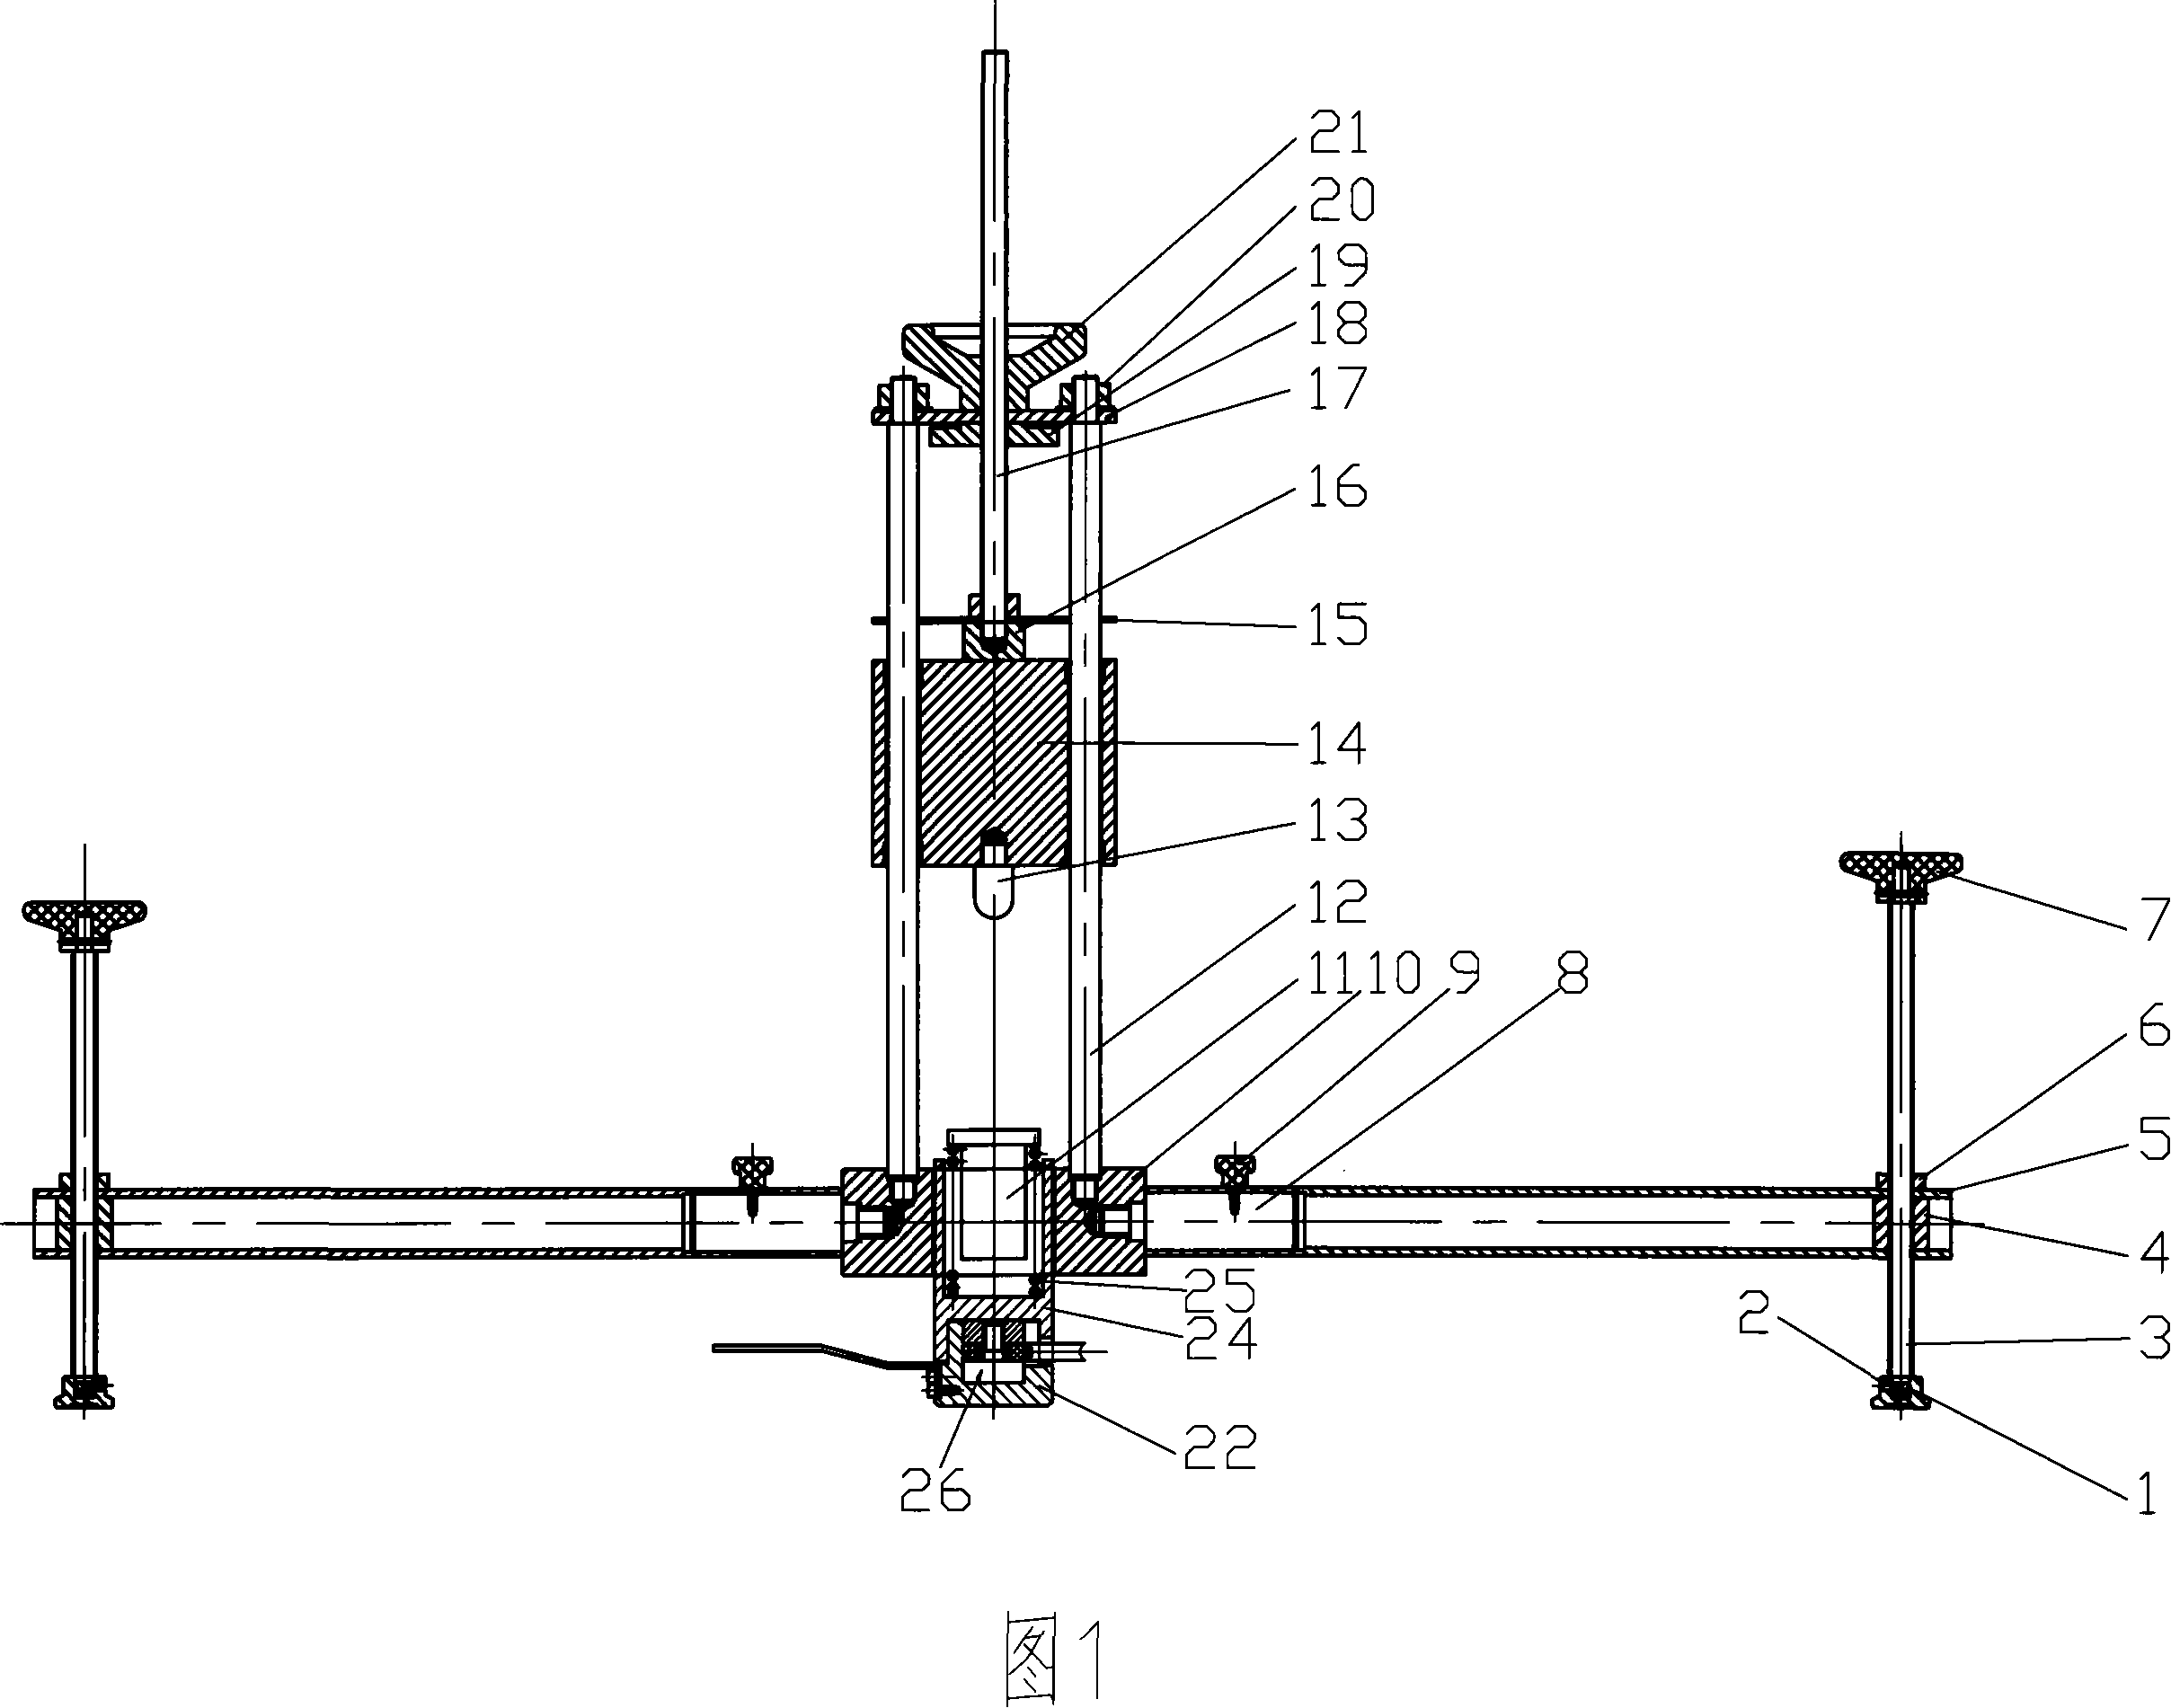 Impact absorption tester